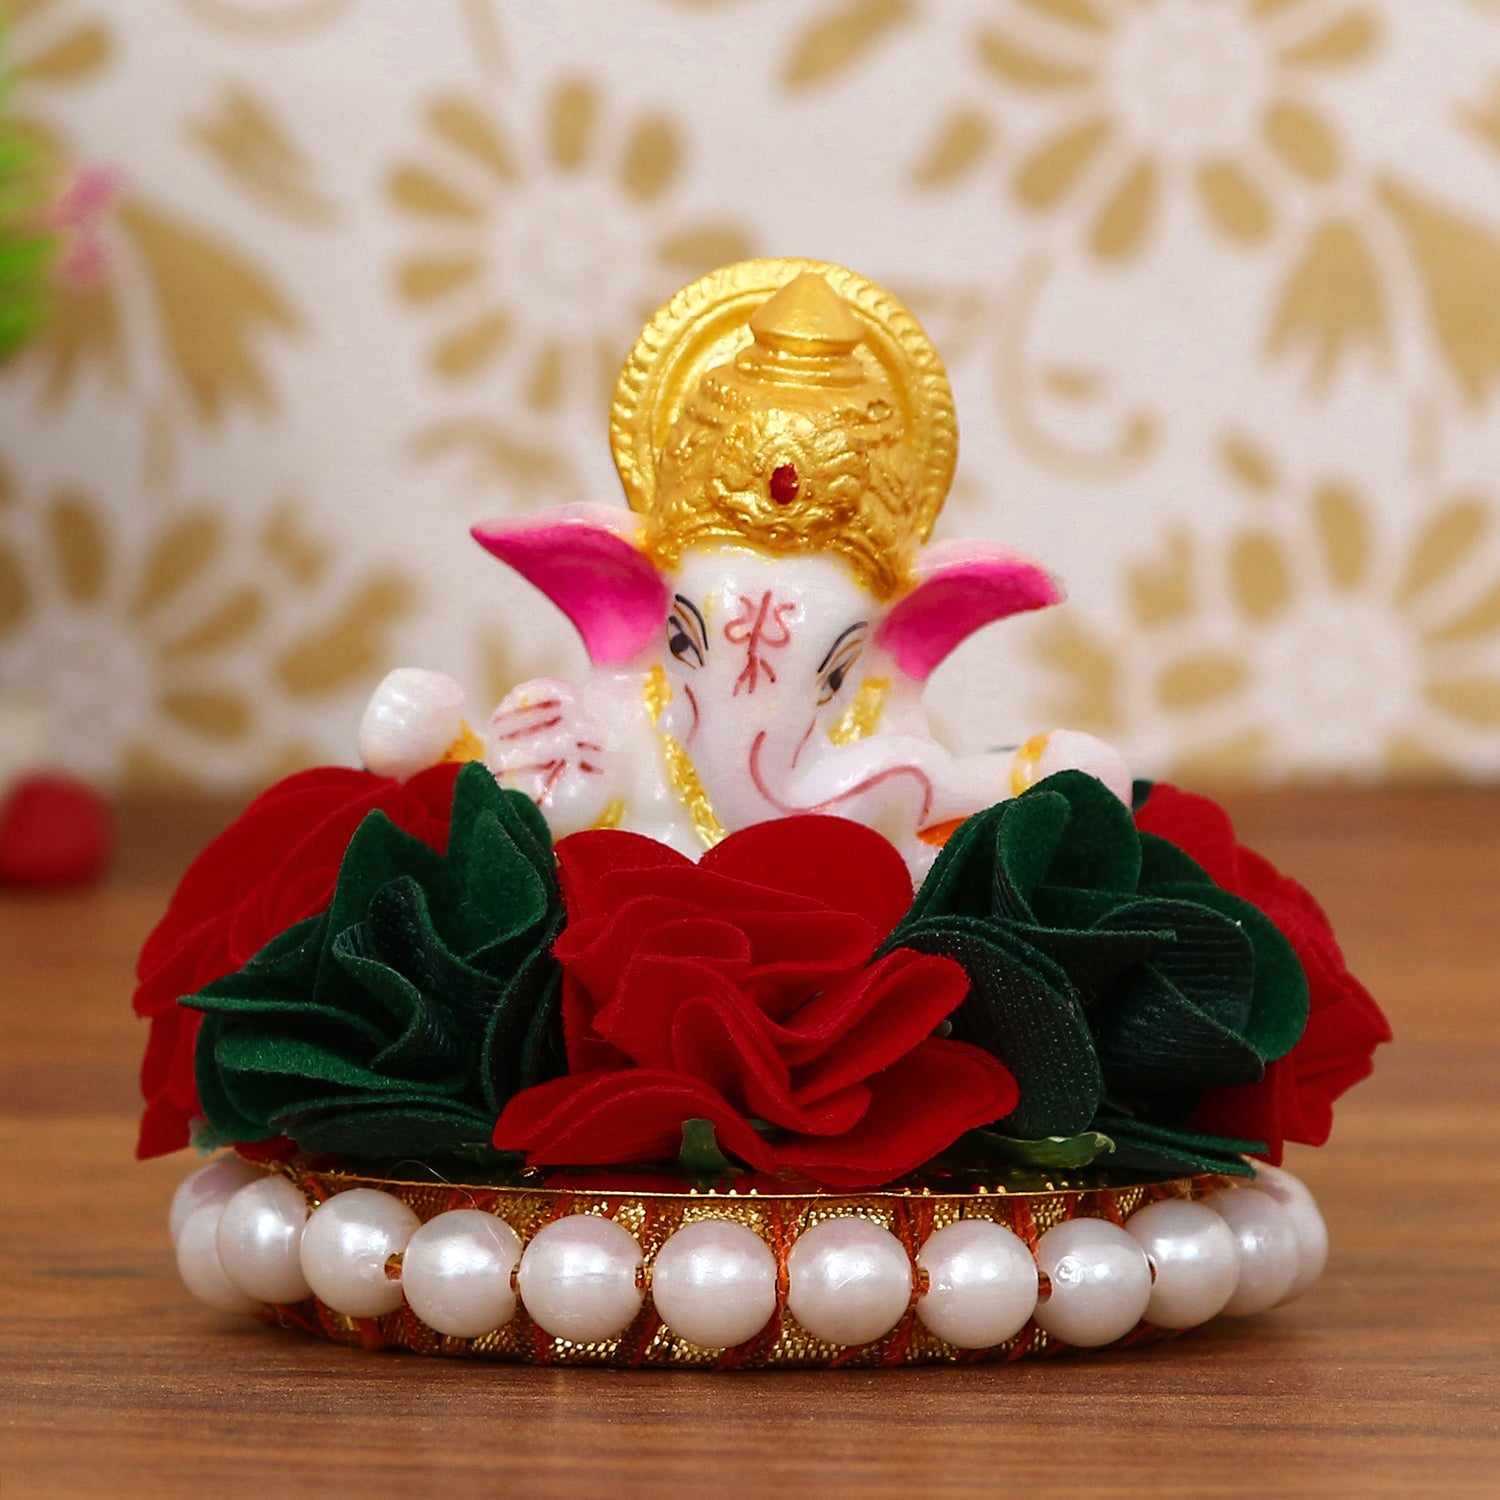 Lord Ganesha Idol on Decorative Handcrafted Plate with Colorful Flowers